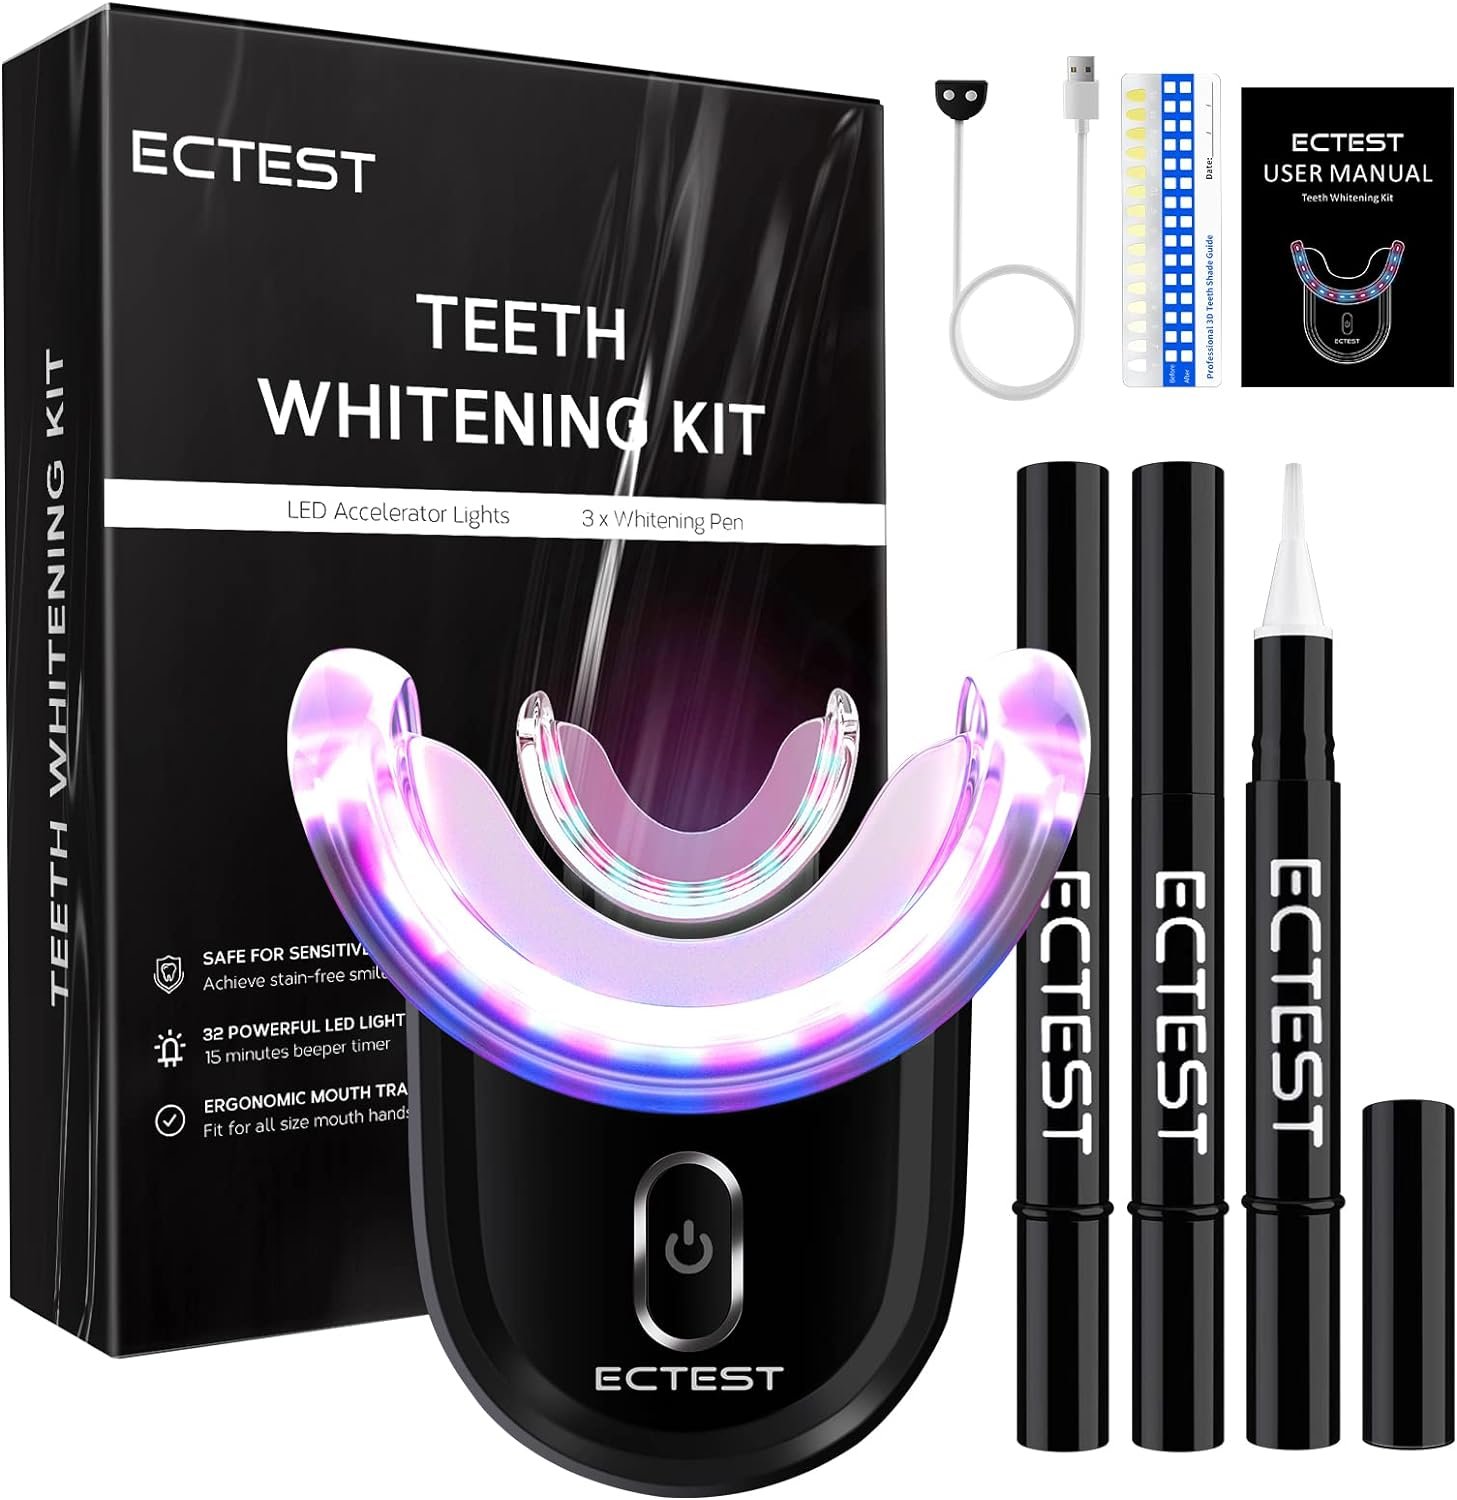 Teeth Whitening Kit with LED Light Effective for Sensitive Teeth or Coffee Drinker, Teeth Whitening Kit with 32X Powerful Blue-Red Recharge Home Easy to Use